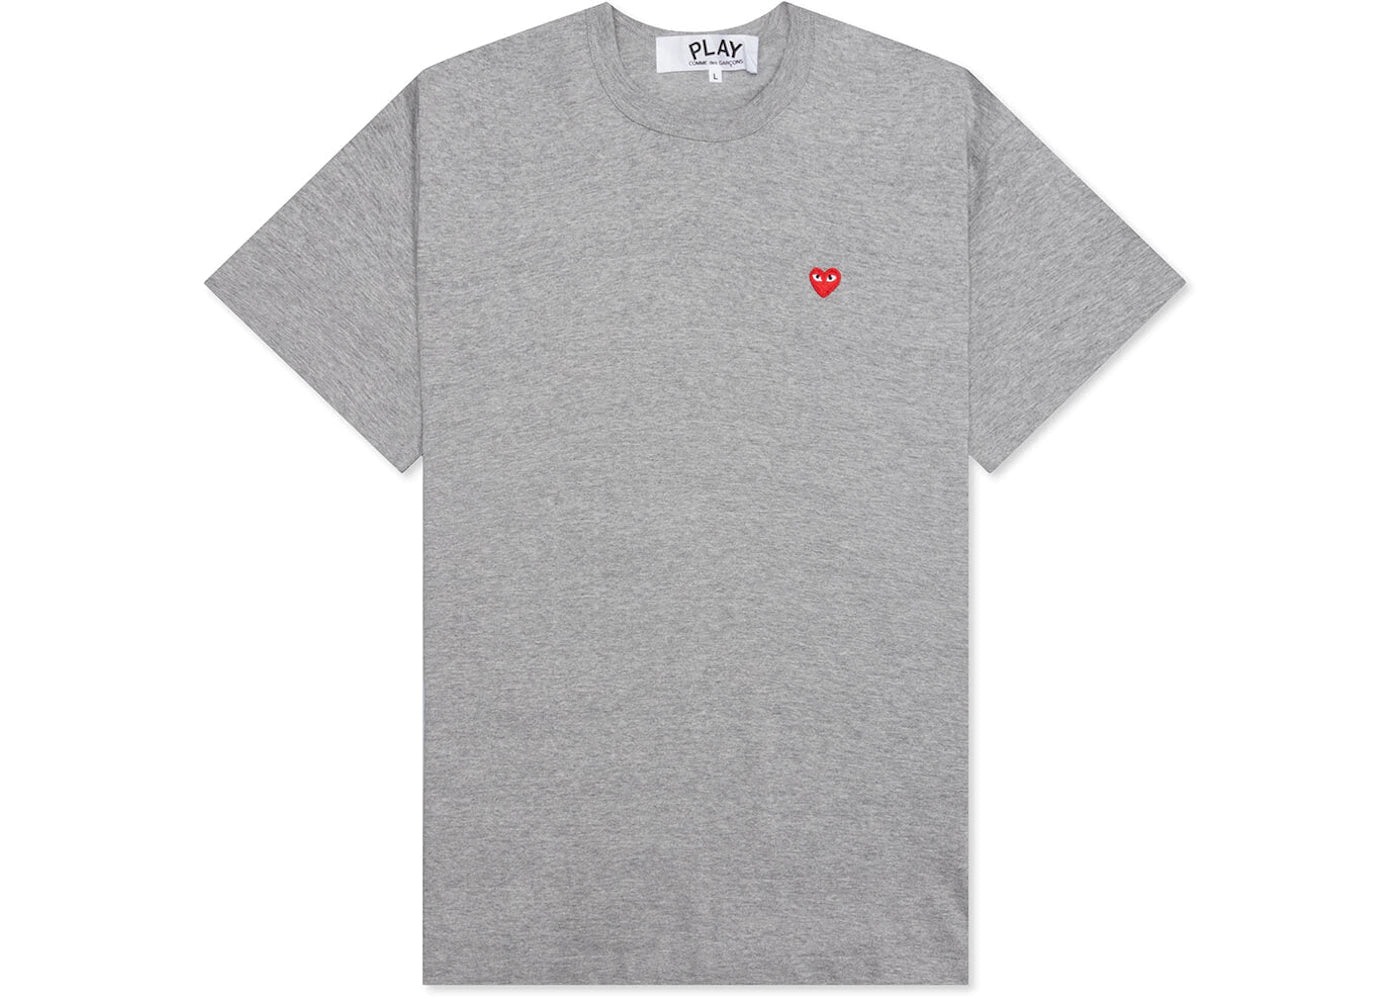 CDG PLAY OUTLINE RED HEART TEE "GREY"